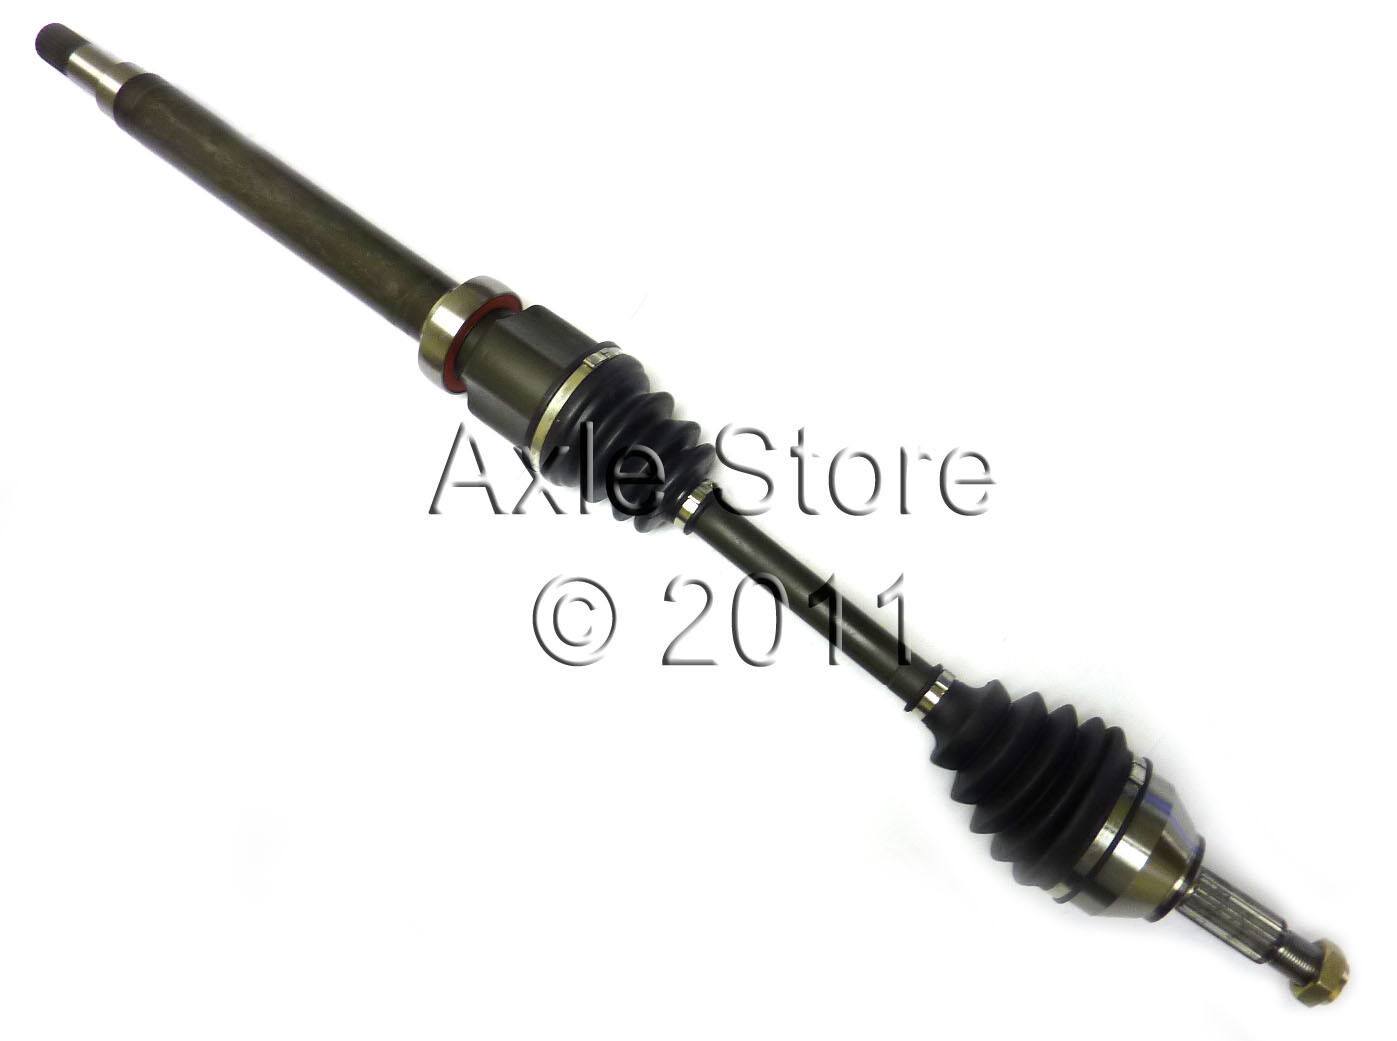 New Front CV Axle Passenger Side with Warranty for 2010 - 2000 Ford Focus